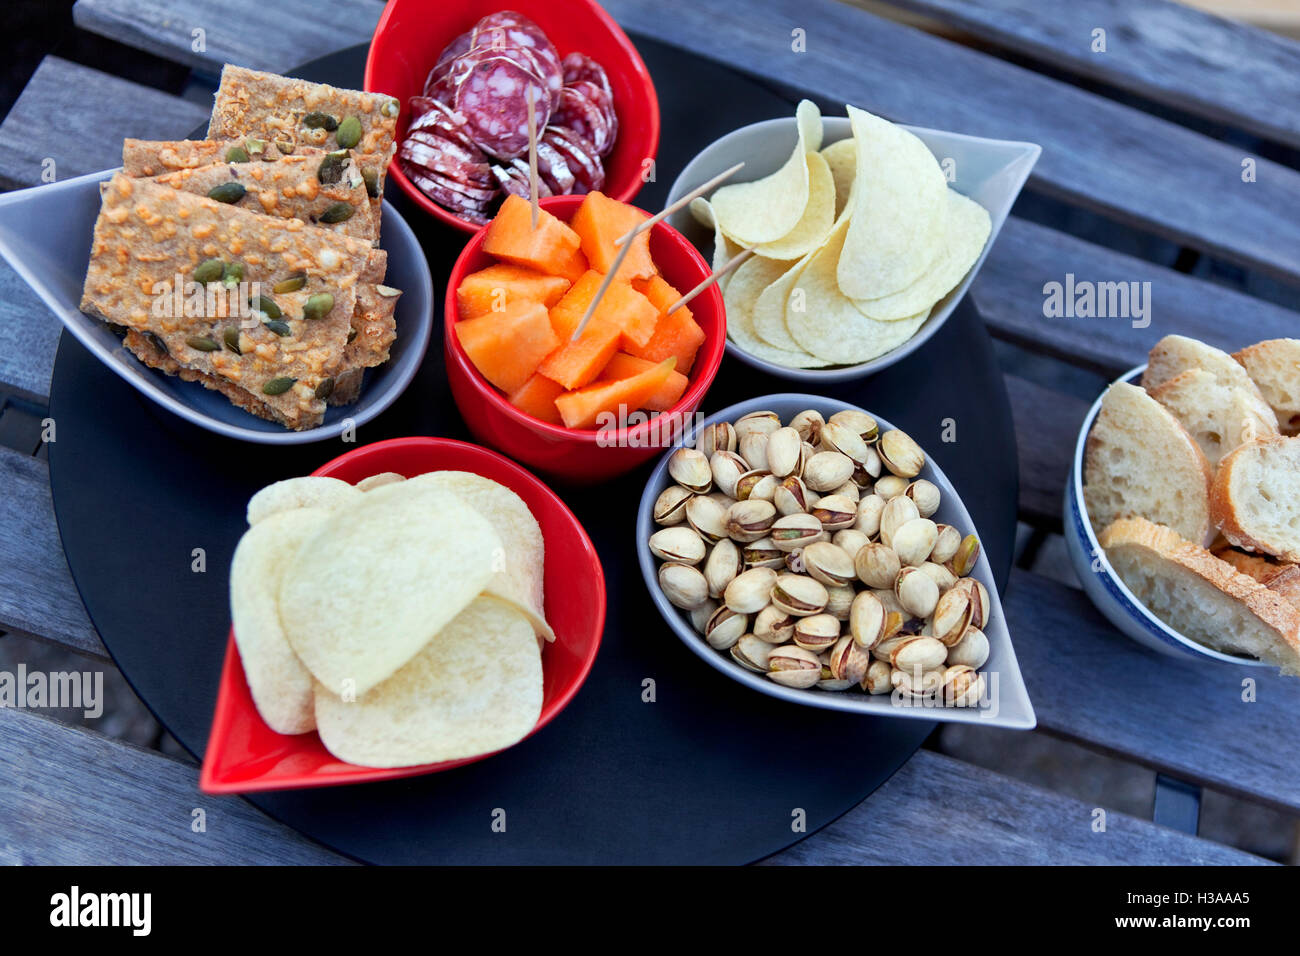 Crackers, chips, melon and sausage on a table Stock Photo